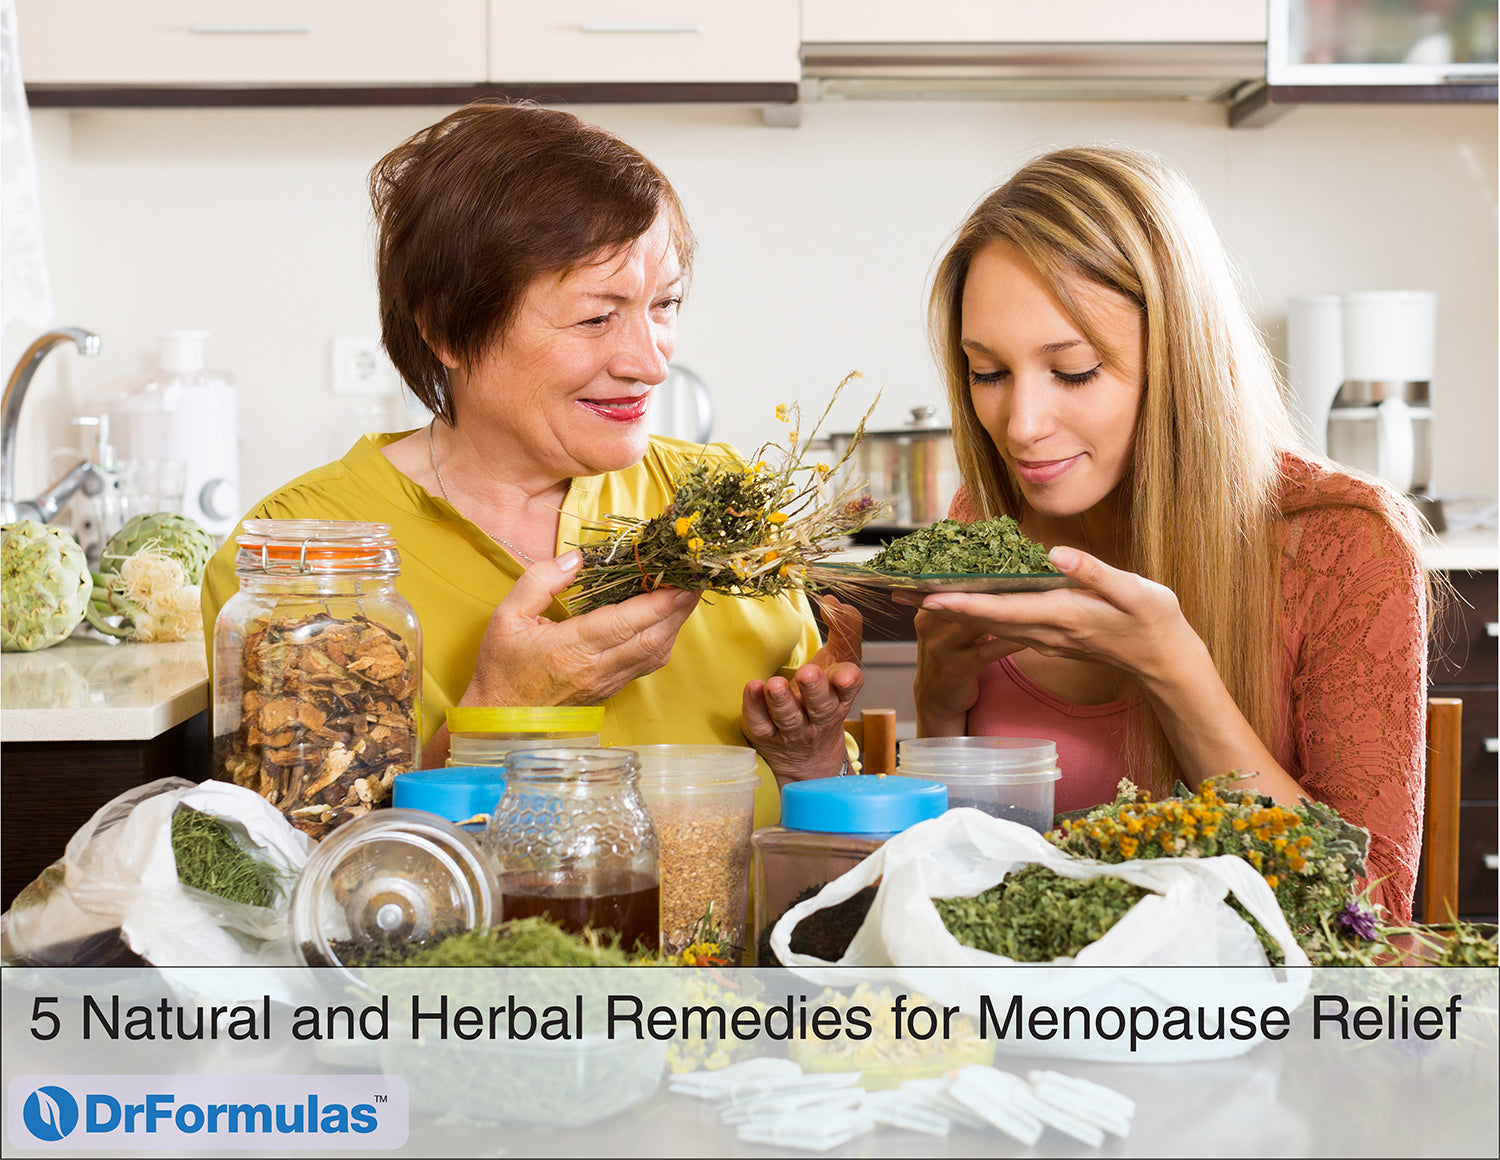 5 Natural and Herbal Remedies for Menopause Relief